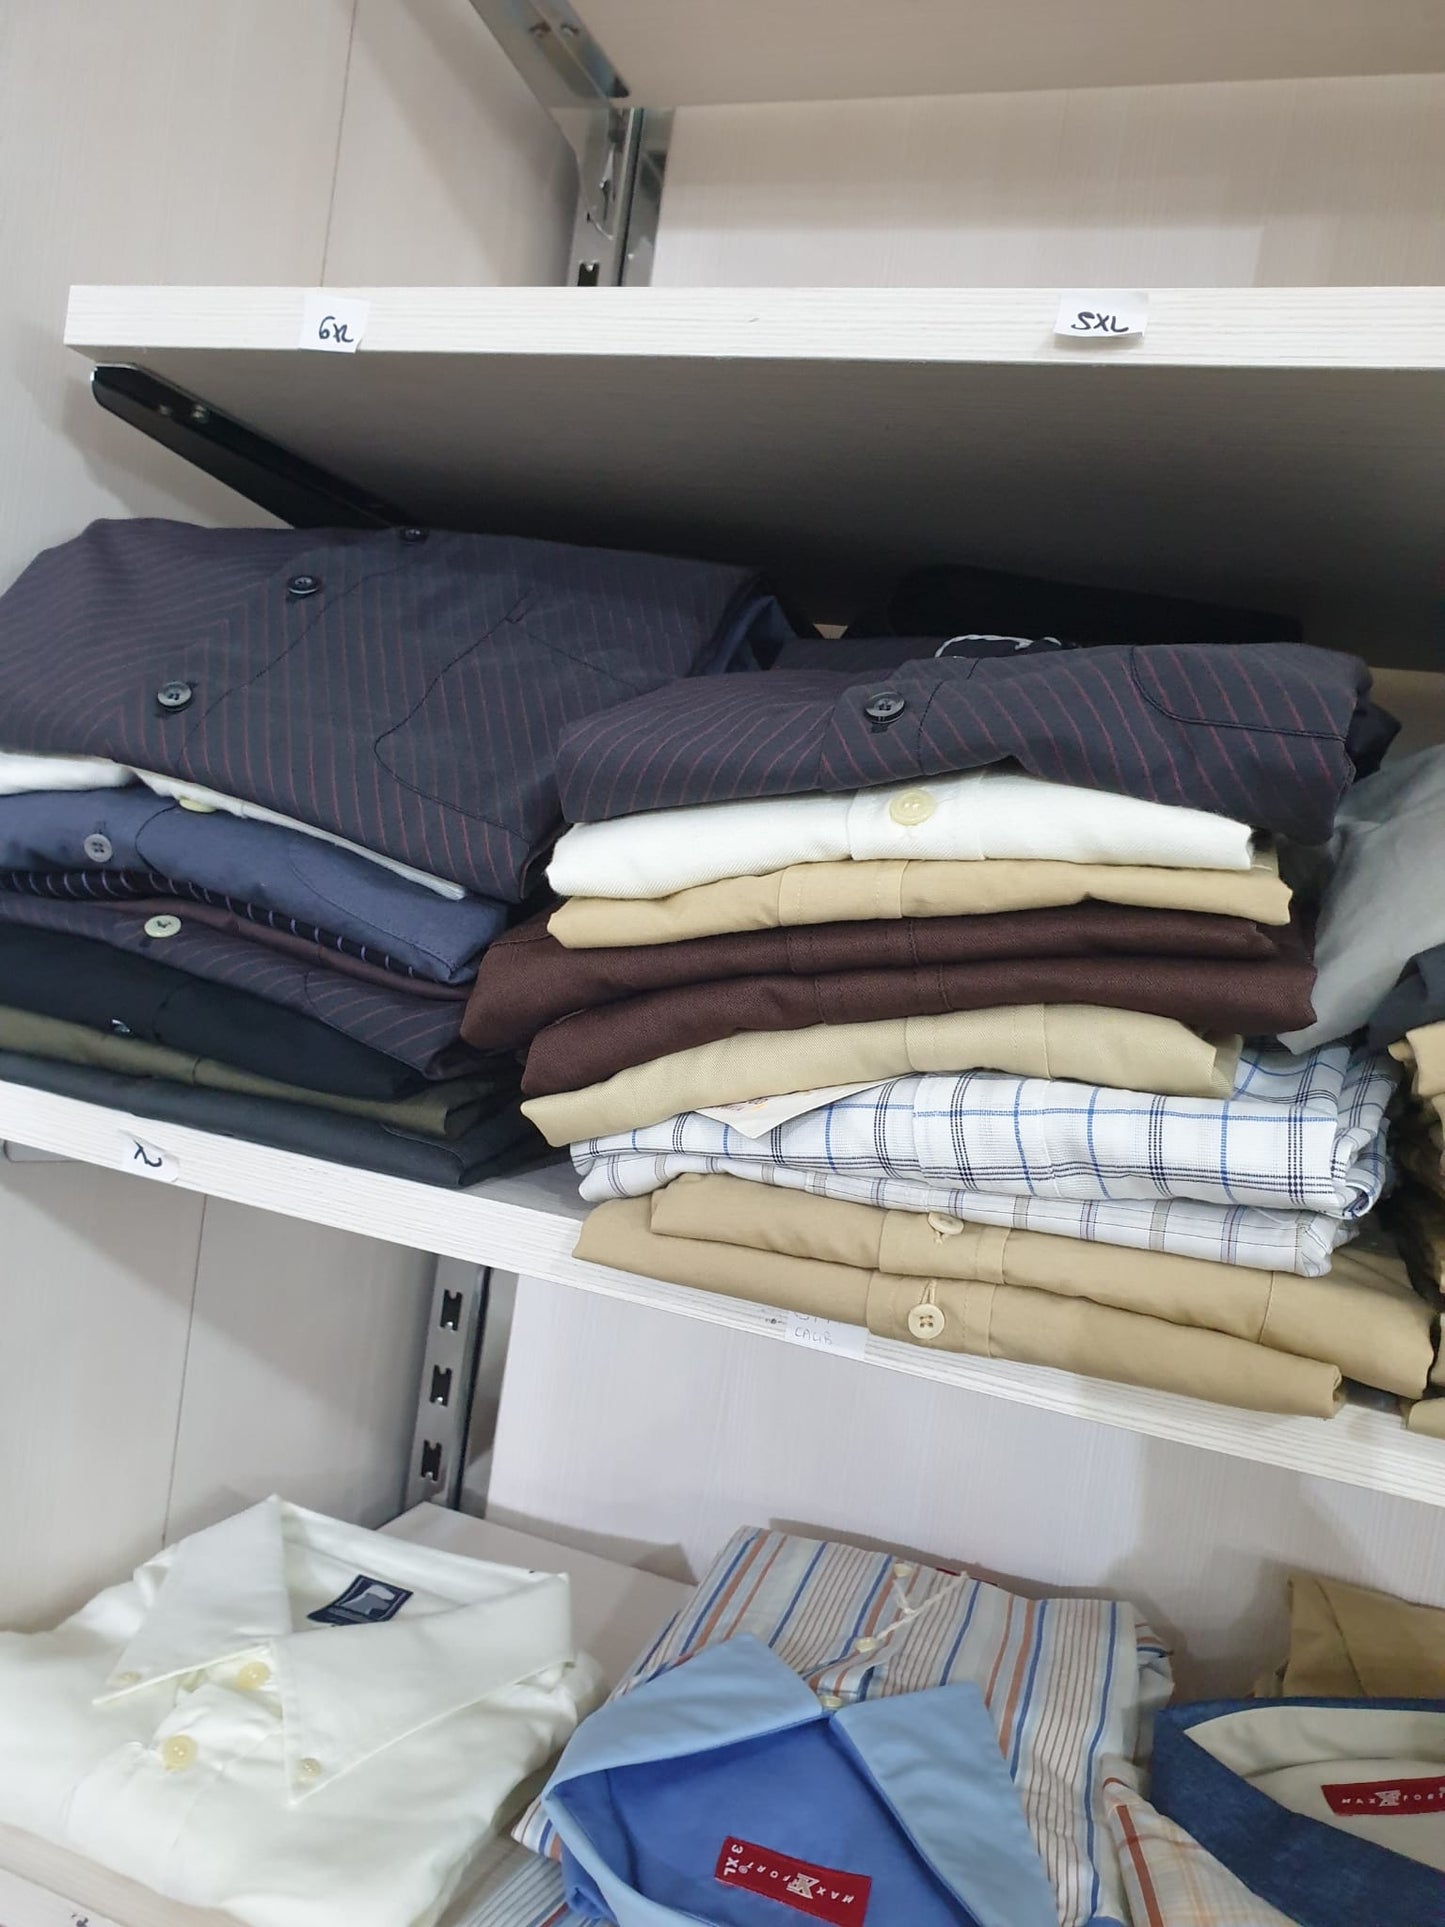 €2.80 per piece MADE IN ITALY men's clothing stock 2000 pieces - S/S F/W - REF. TV6108